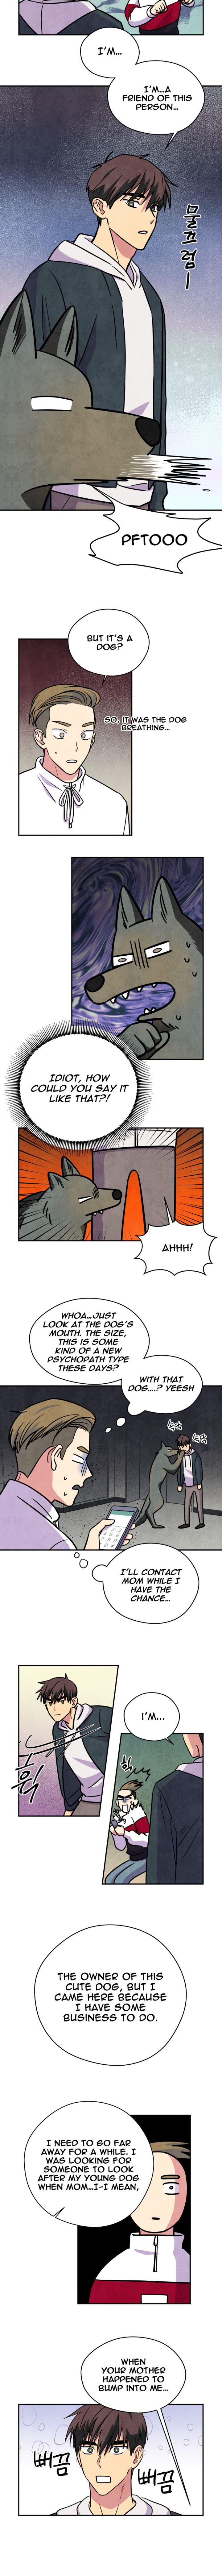 The Little Red Riding Hood Chapter 30 Page 3